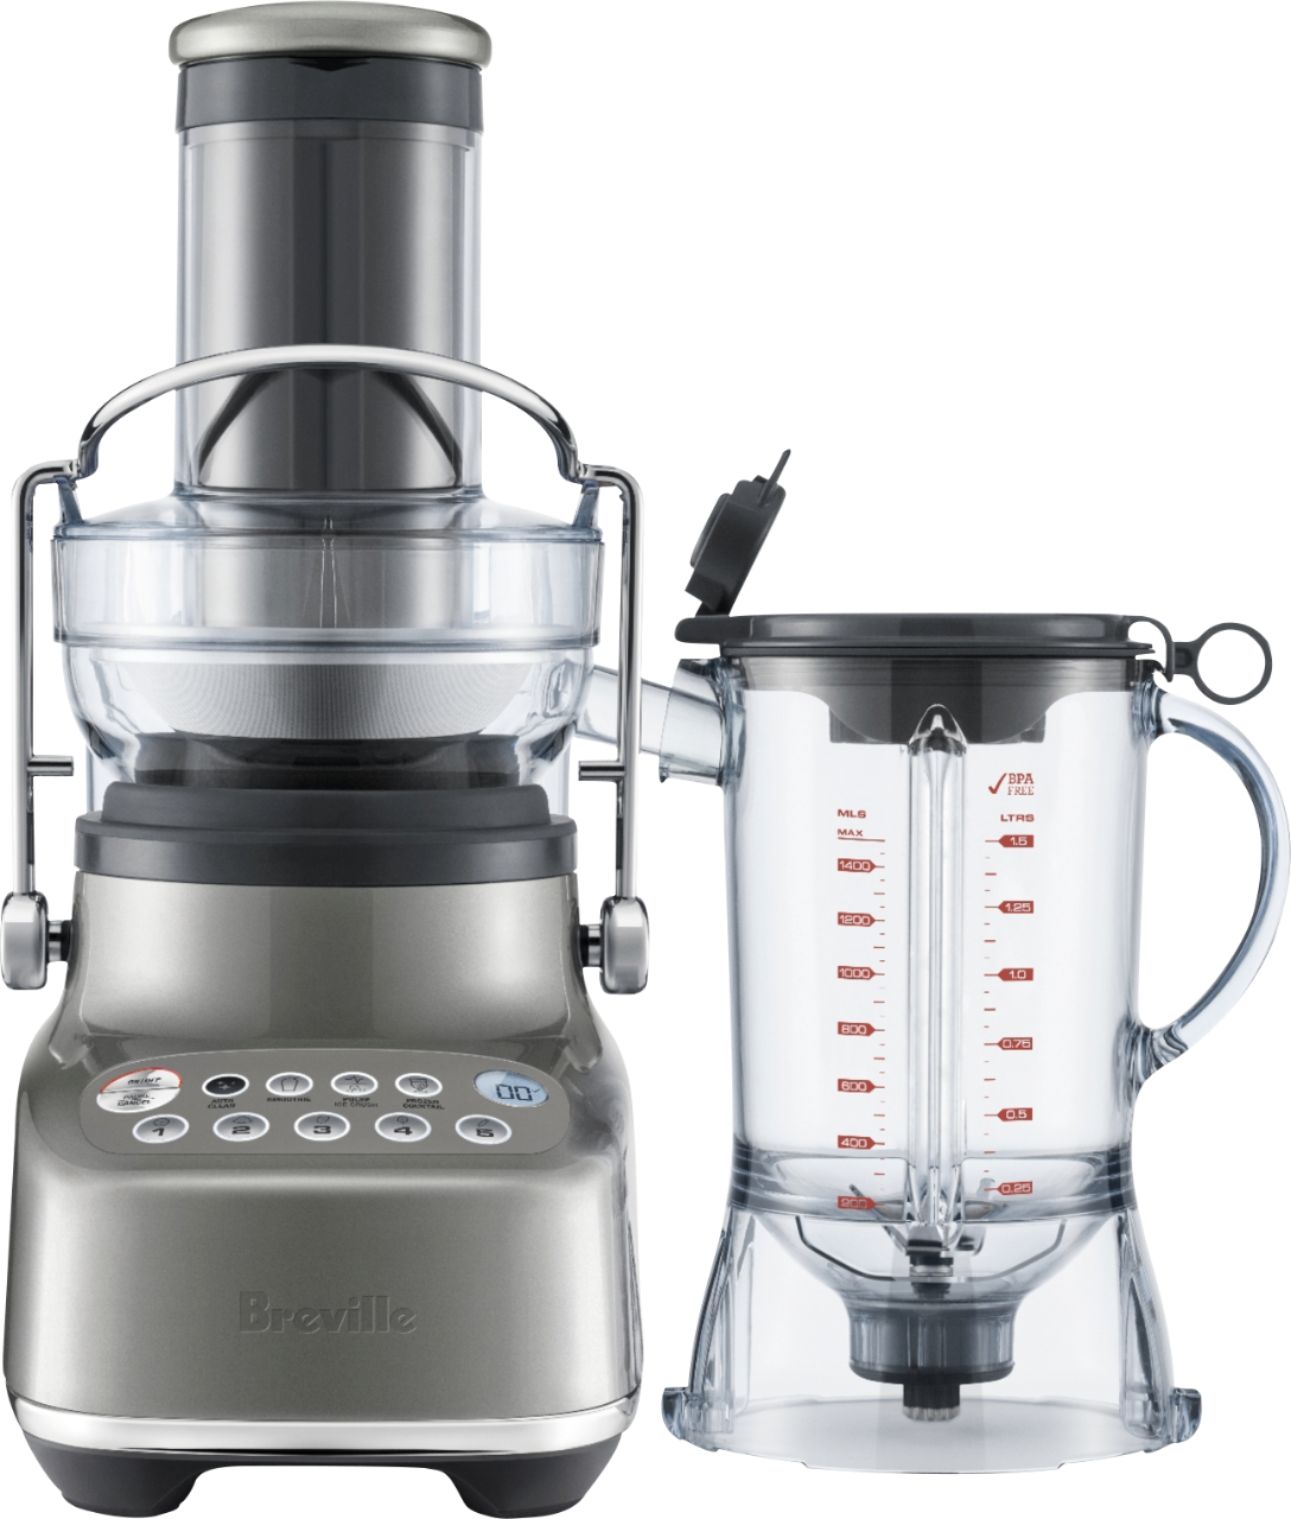 Breville Hemisphere Control Blender review: This Breville's